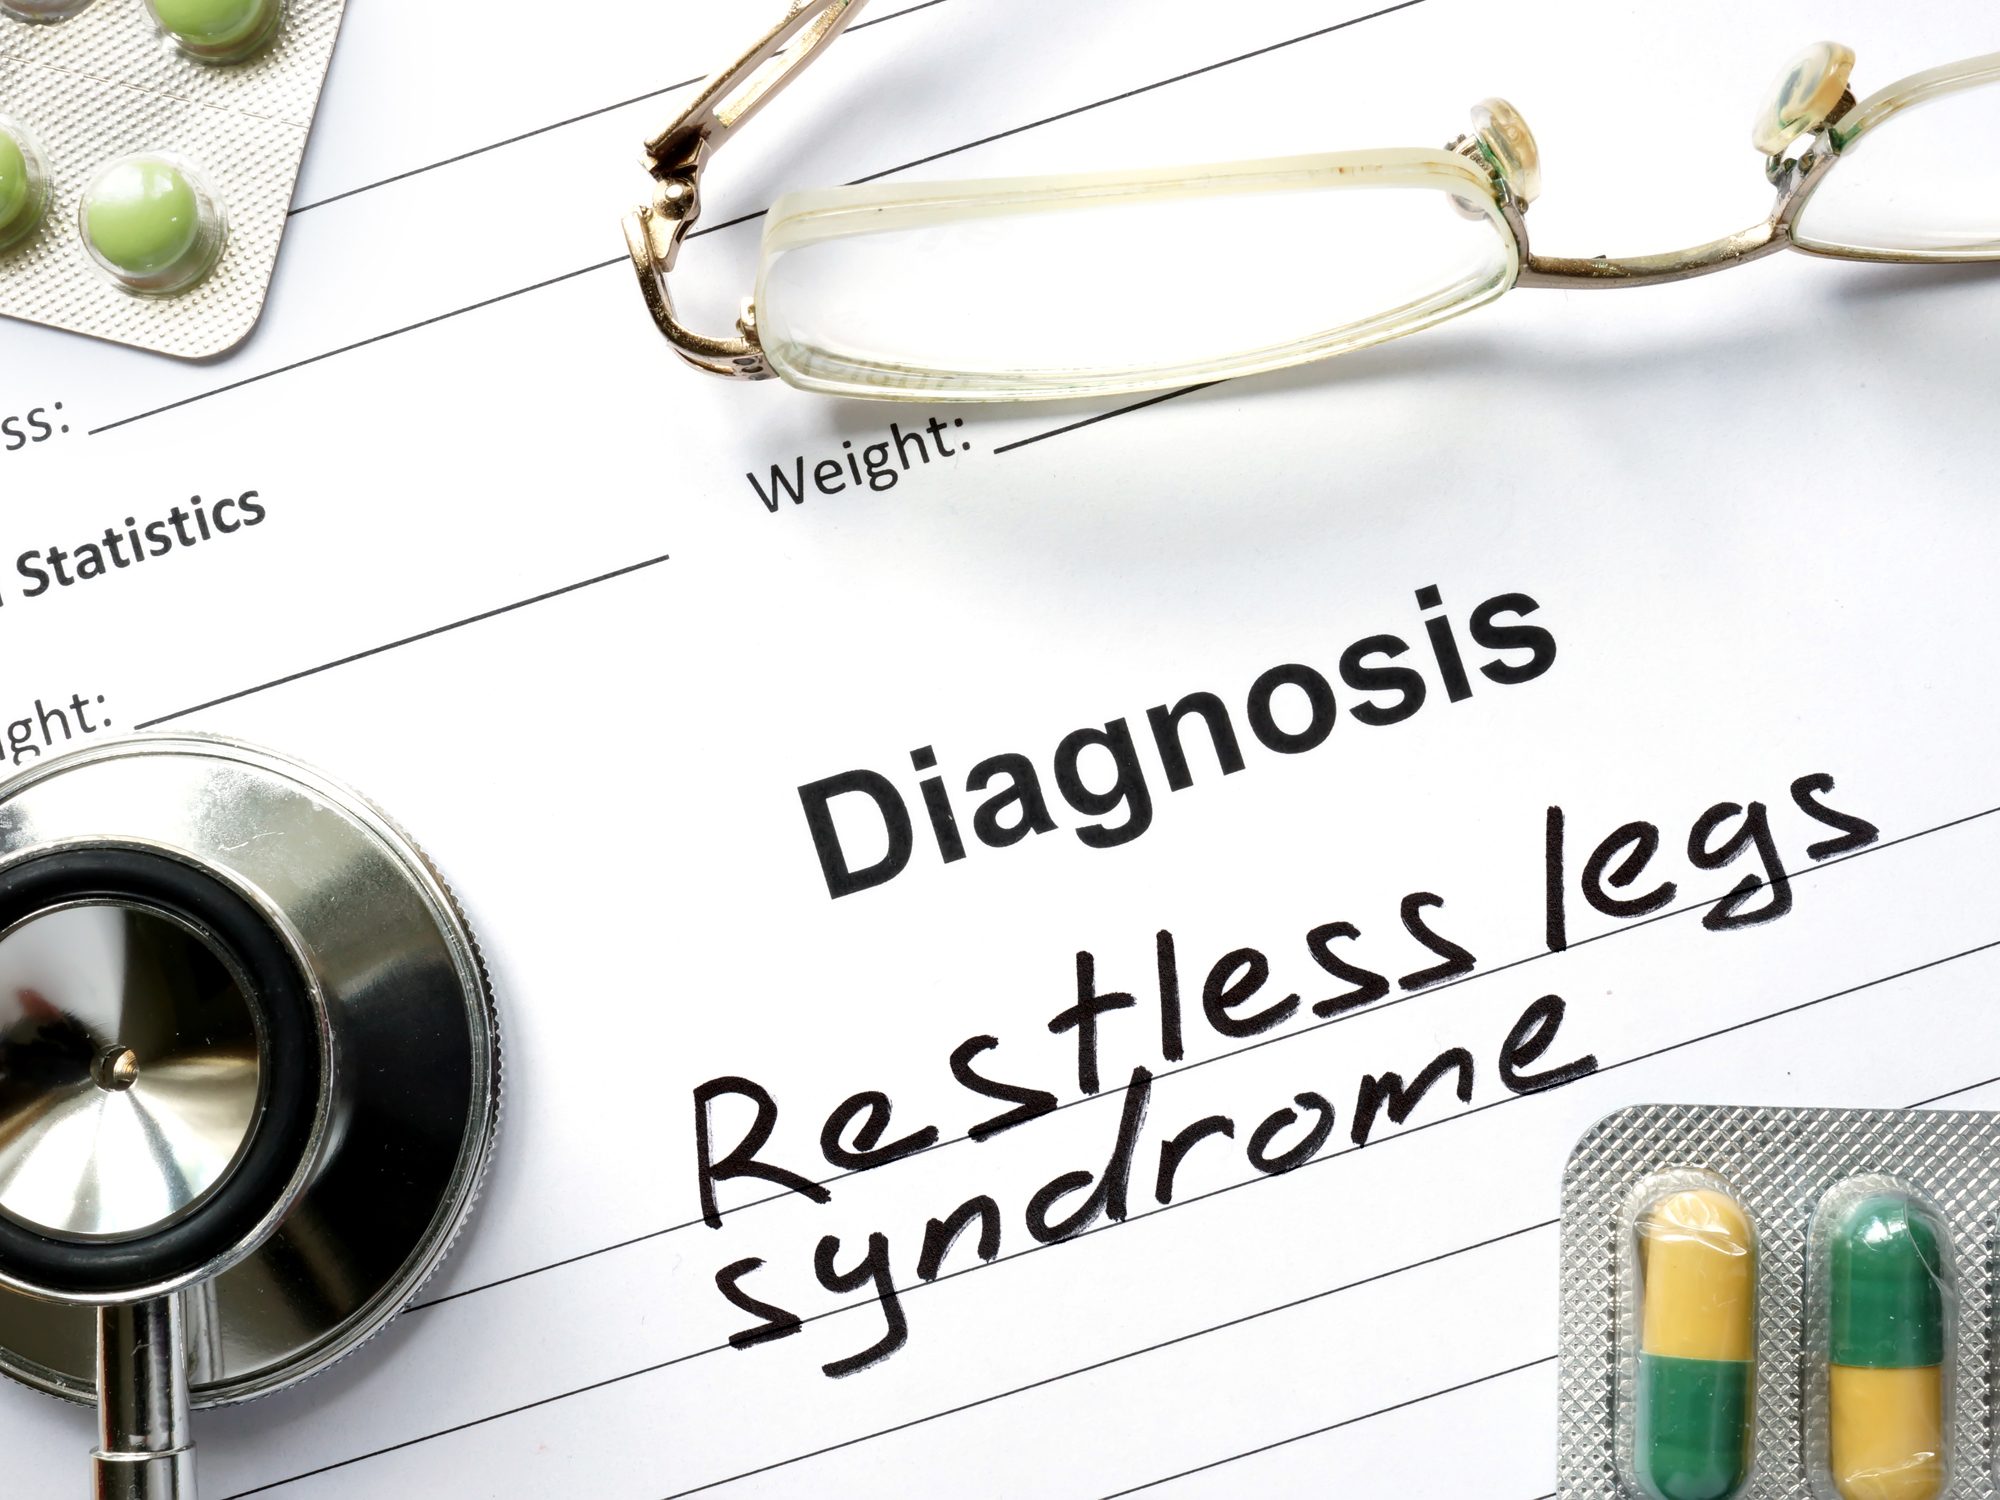 Get rid of restless legs for good